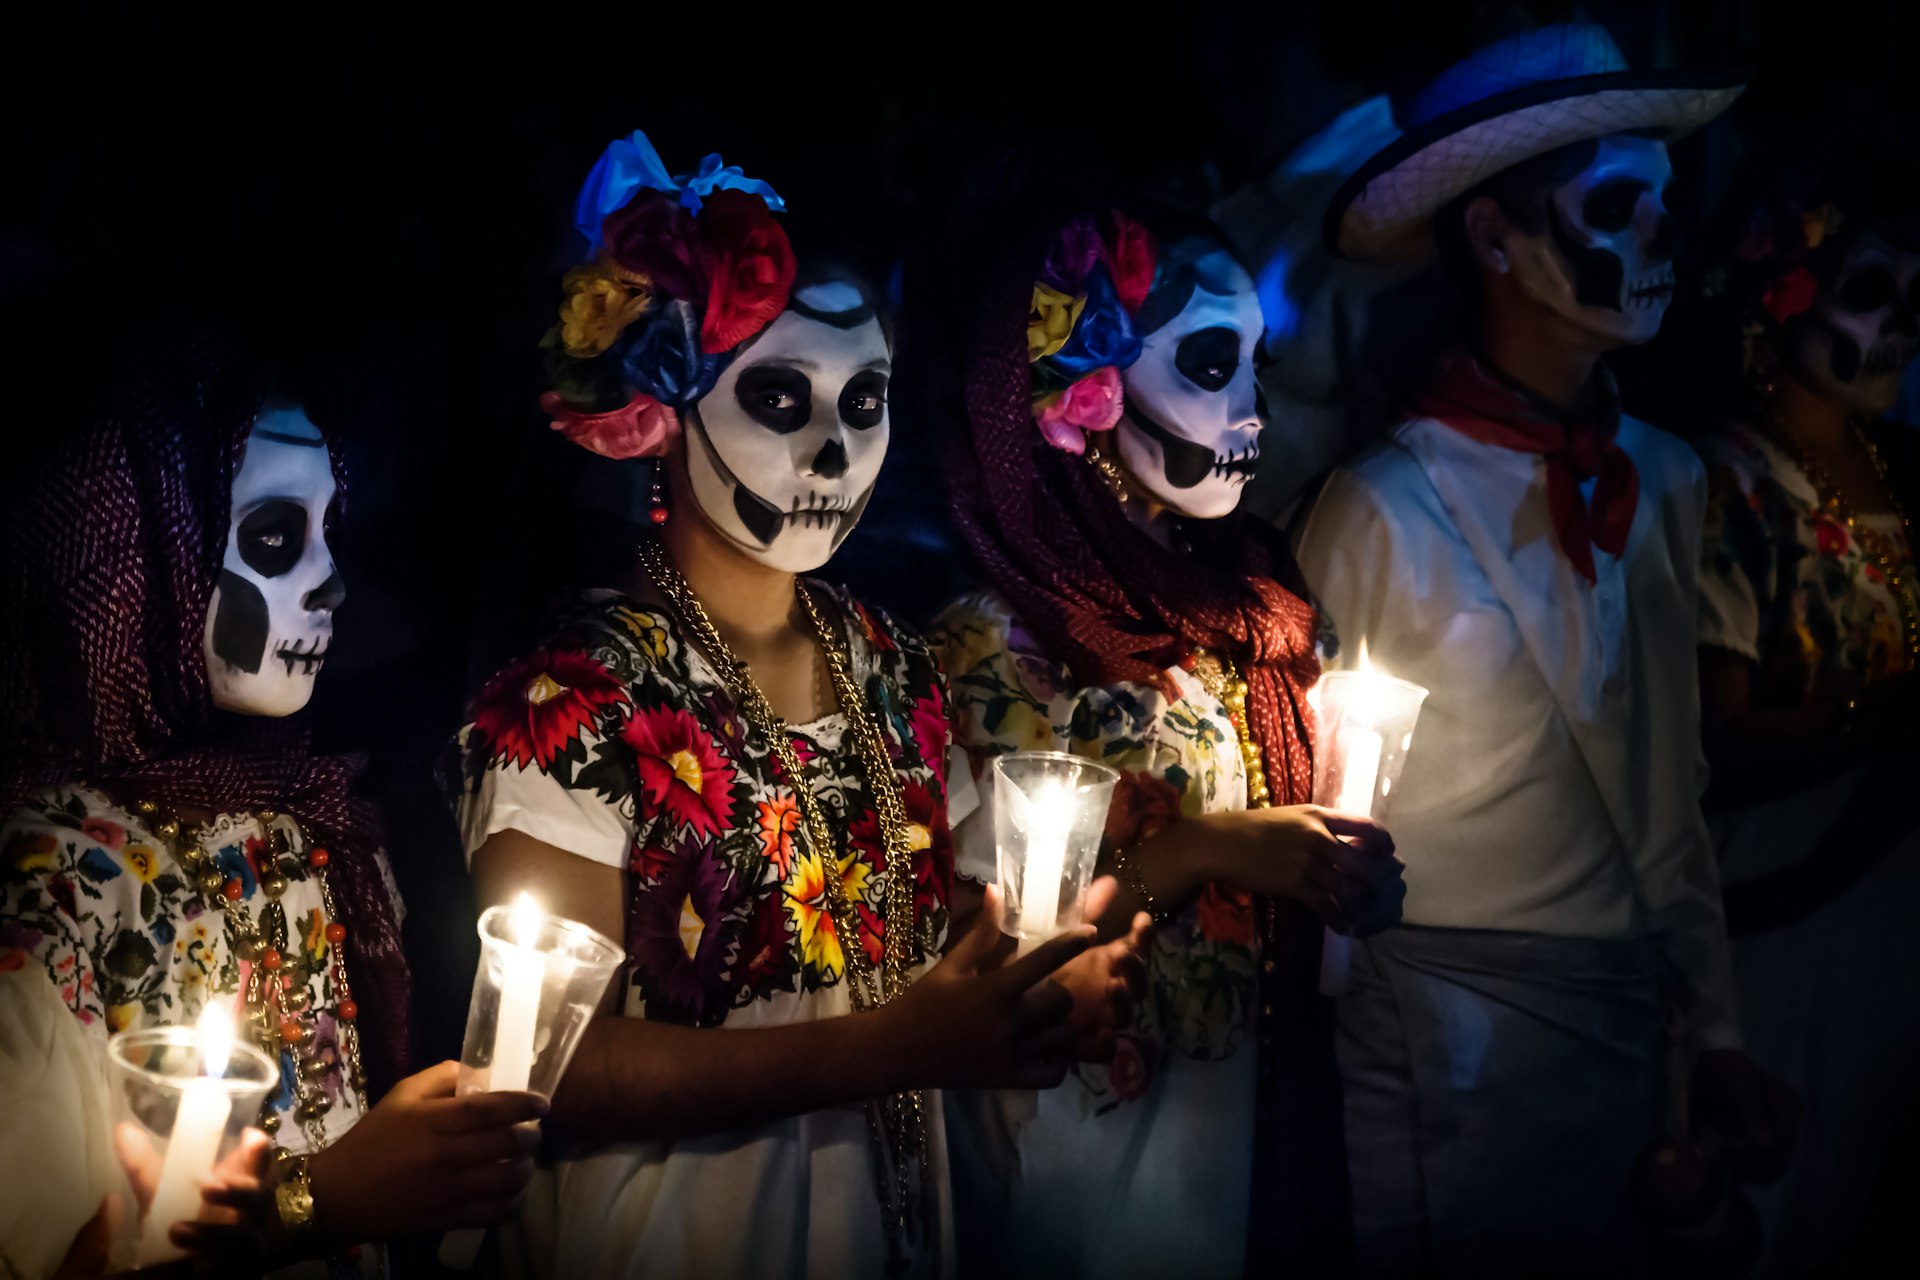 Three women with Catrina costumes and a man in white cowboy dress, wearing skull makeup and holding candles at a Dia de Muertos parade